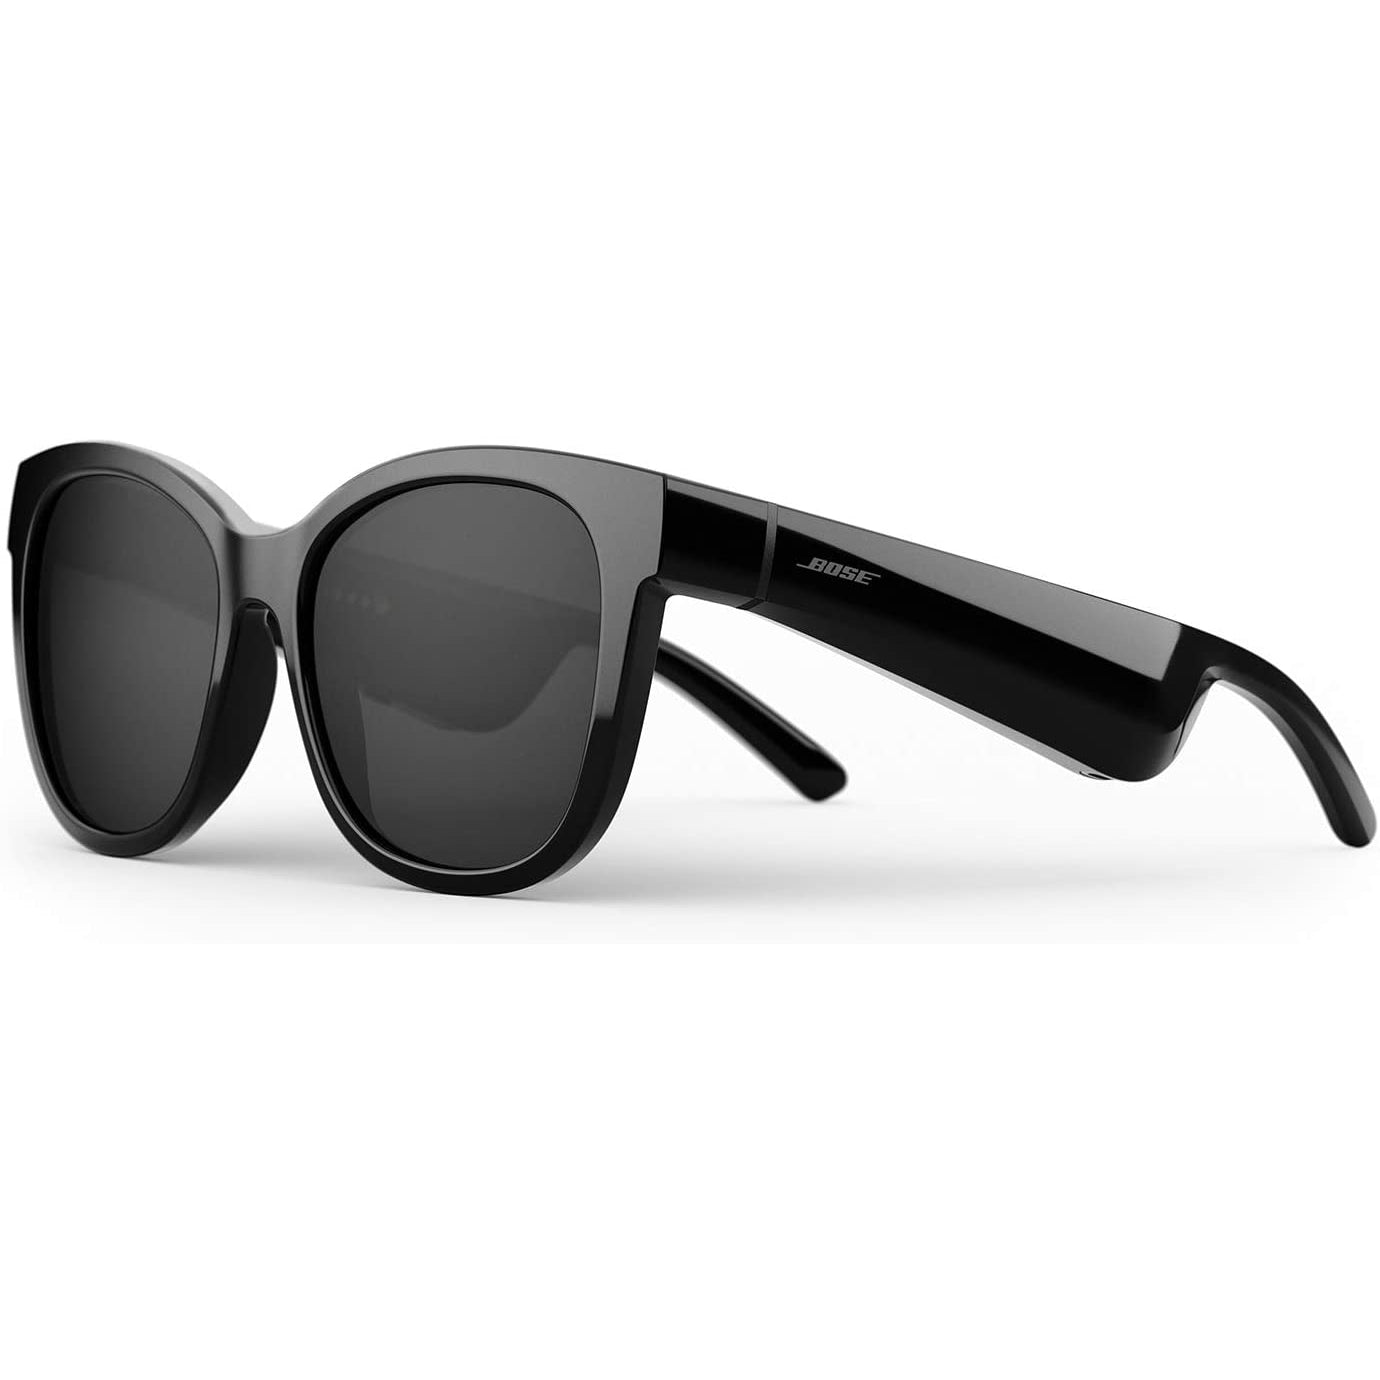 Bose Frames Soprano Style Bluetooth Audio Sunglasses - Black (One Size - Fits All)